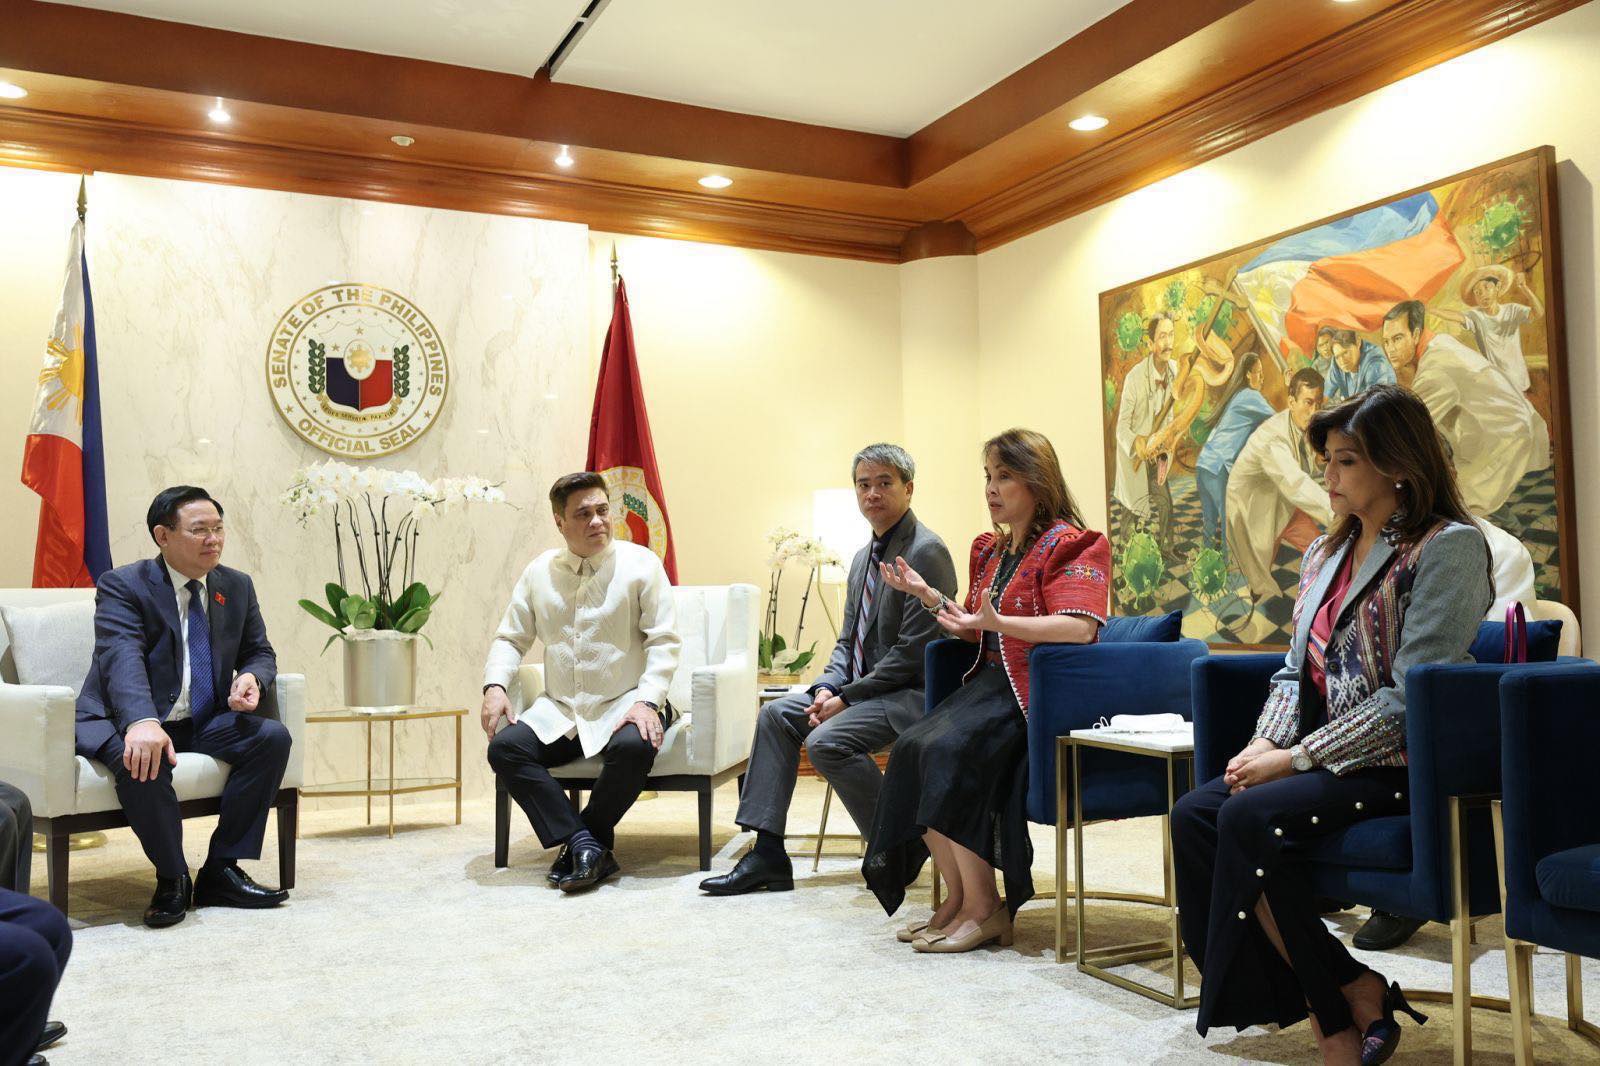 Senate President Pro Tempore Loren Legarda pushes for a trade mission between Vietnam and the Philippines.